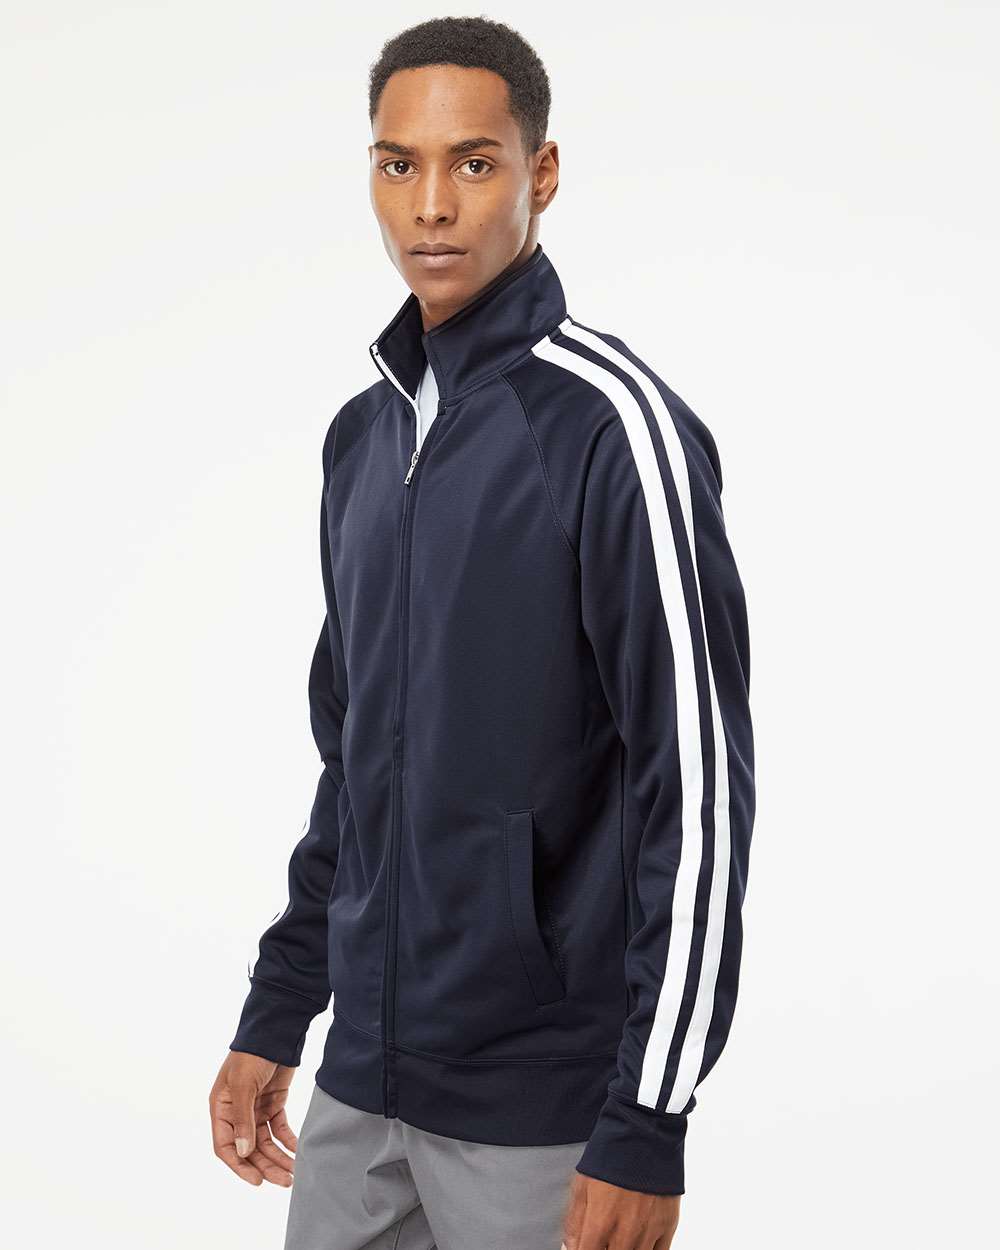 Independent Trading Co Unisex Poly-Tech Full-Zip Track Jacket 